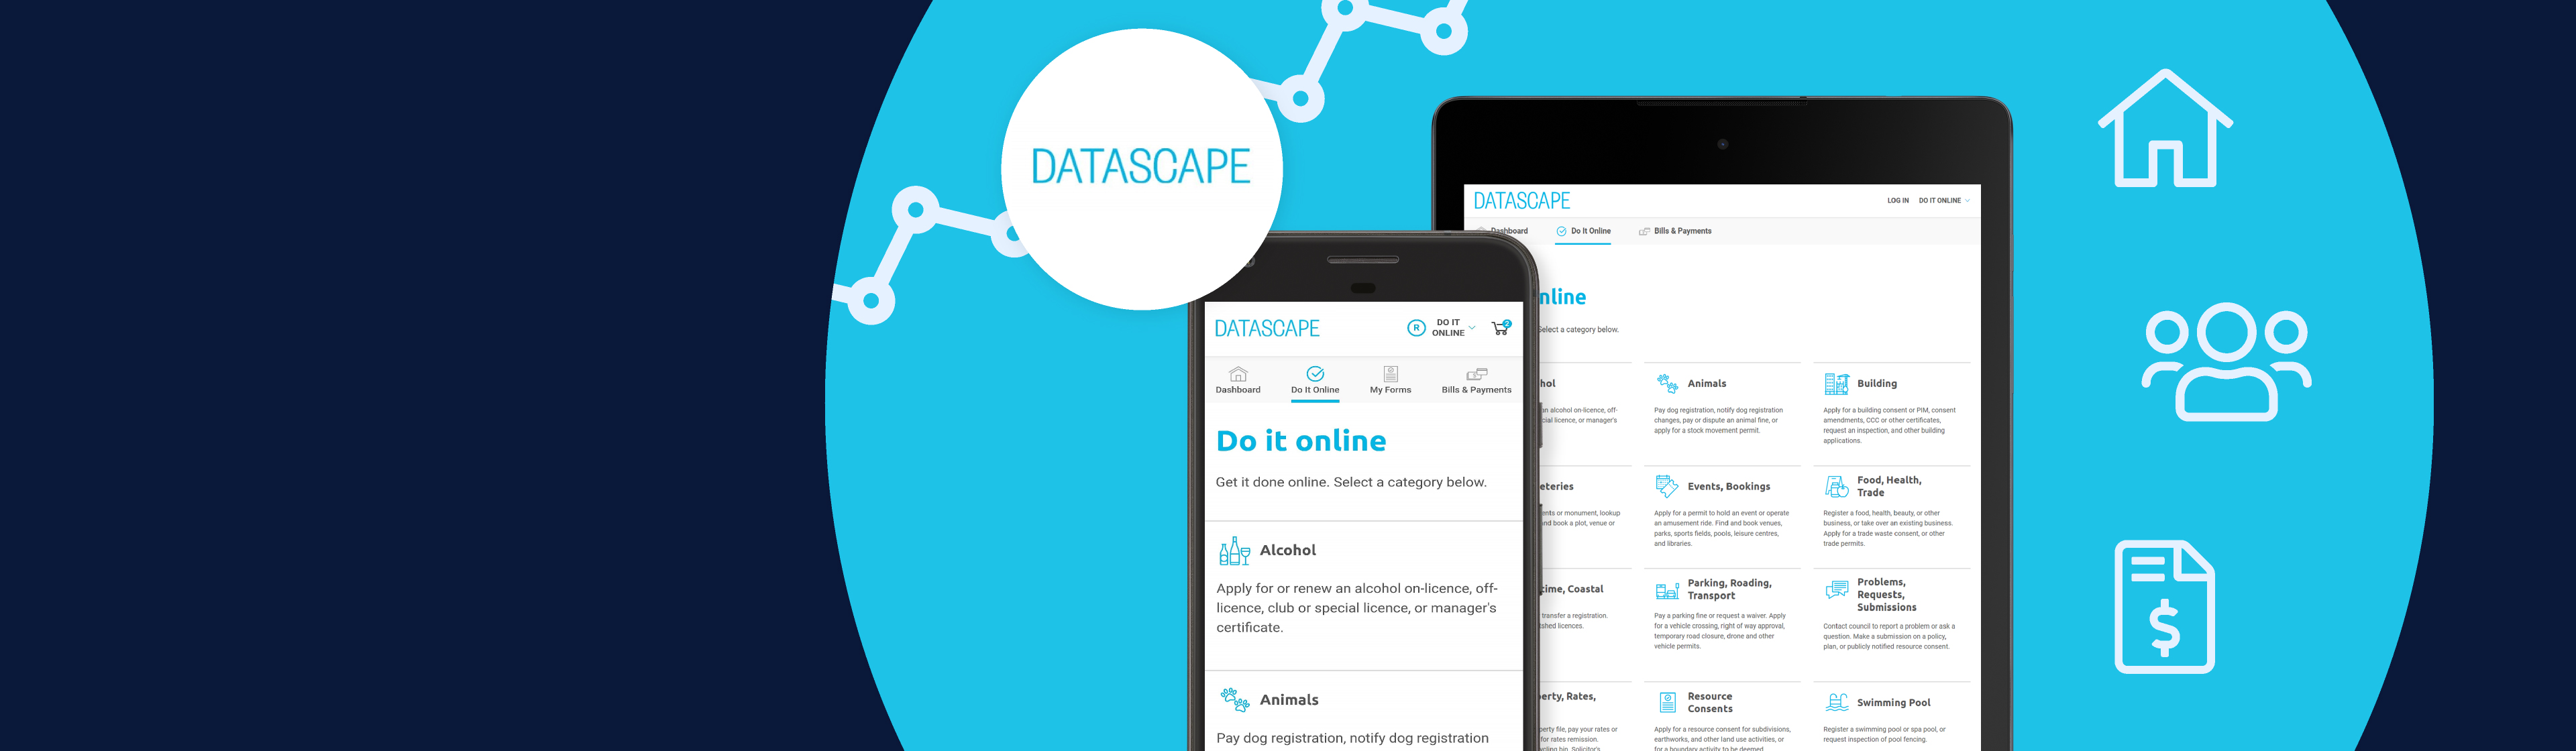 A screen mock-up of the Datascape Enterprise software